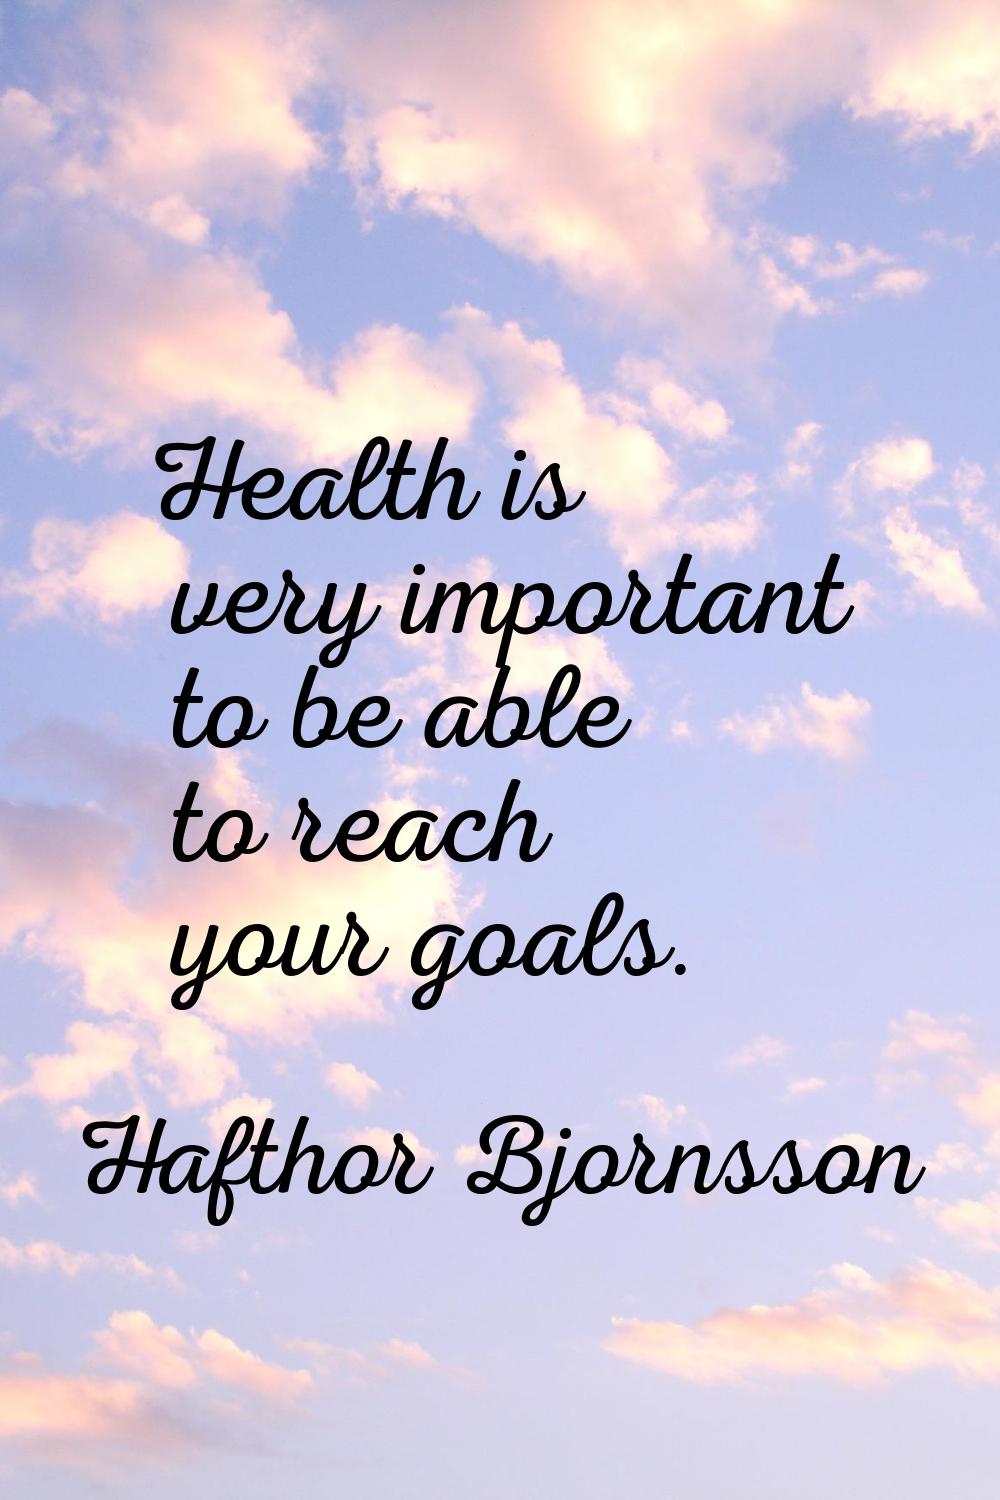 Health is very important to be able to reach your goals.